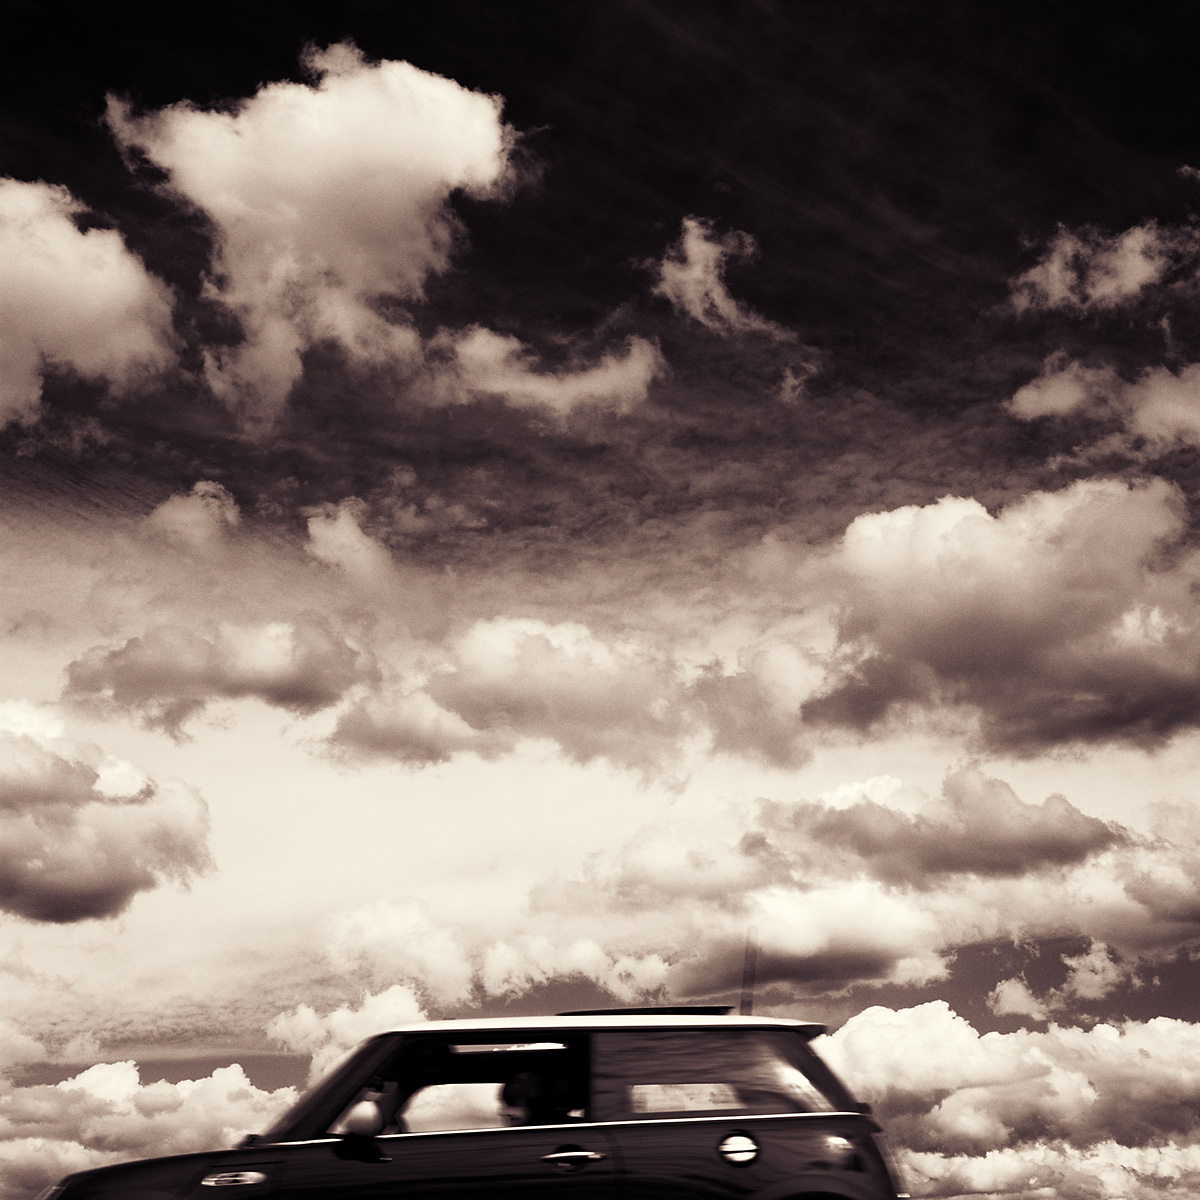 Stephen Austin Welch commercial director & advertising and fine art photographer Mini Cooper B&W black and white sepia selenium duo-toned photography: moody and dramatic fine art photographs